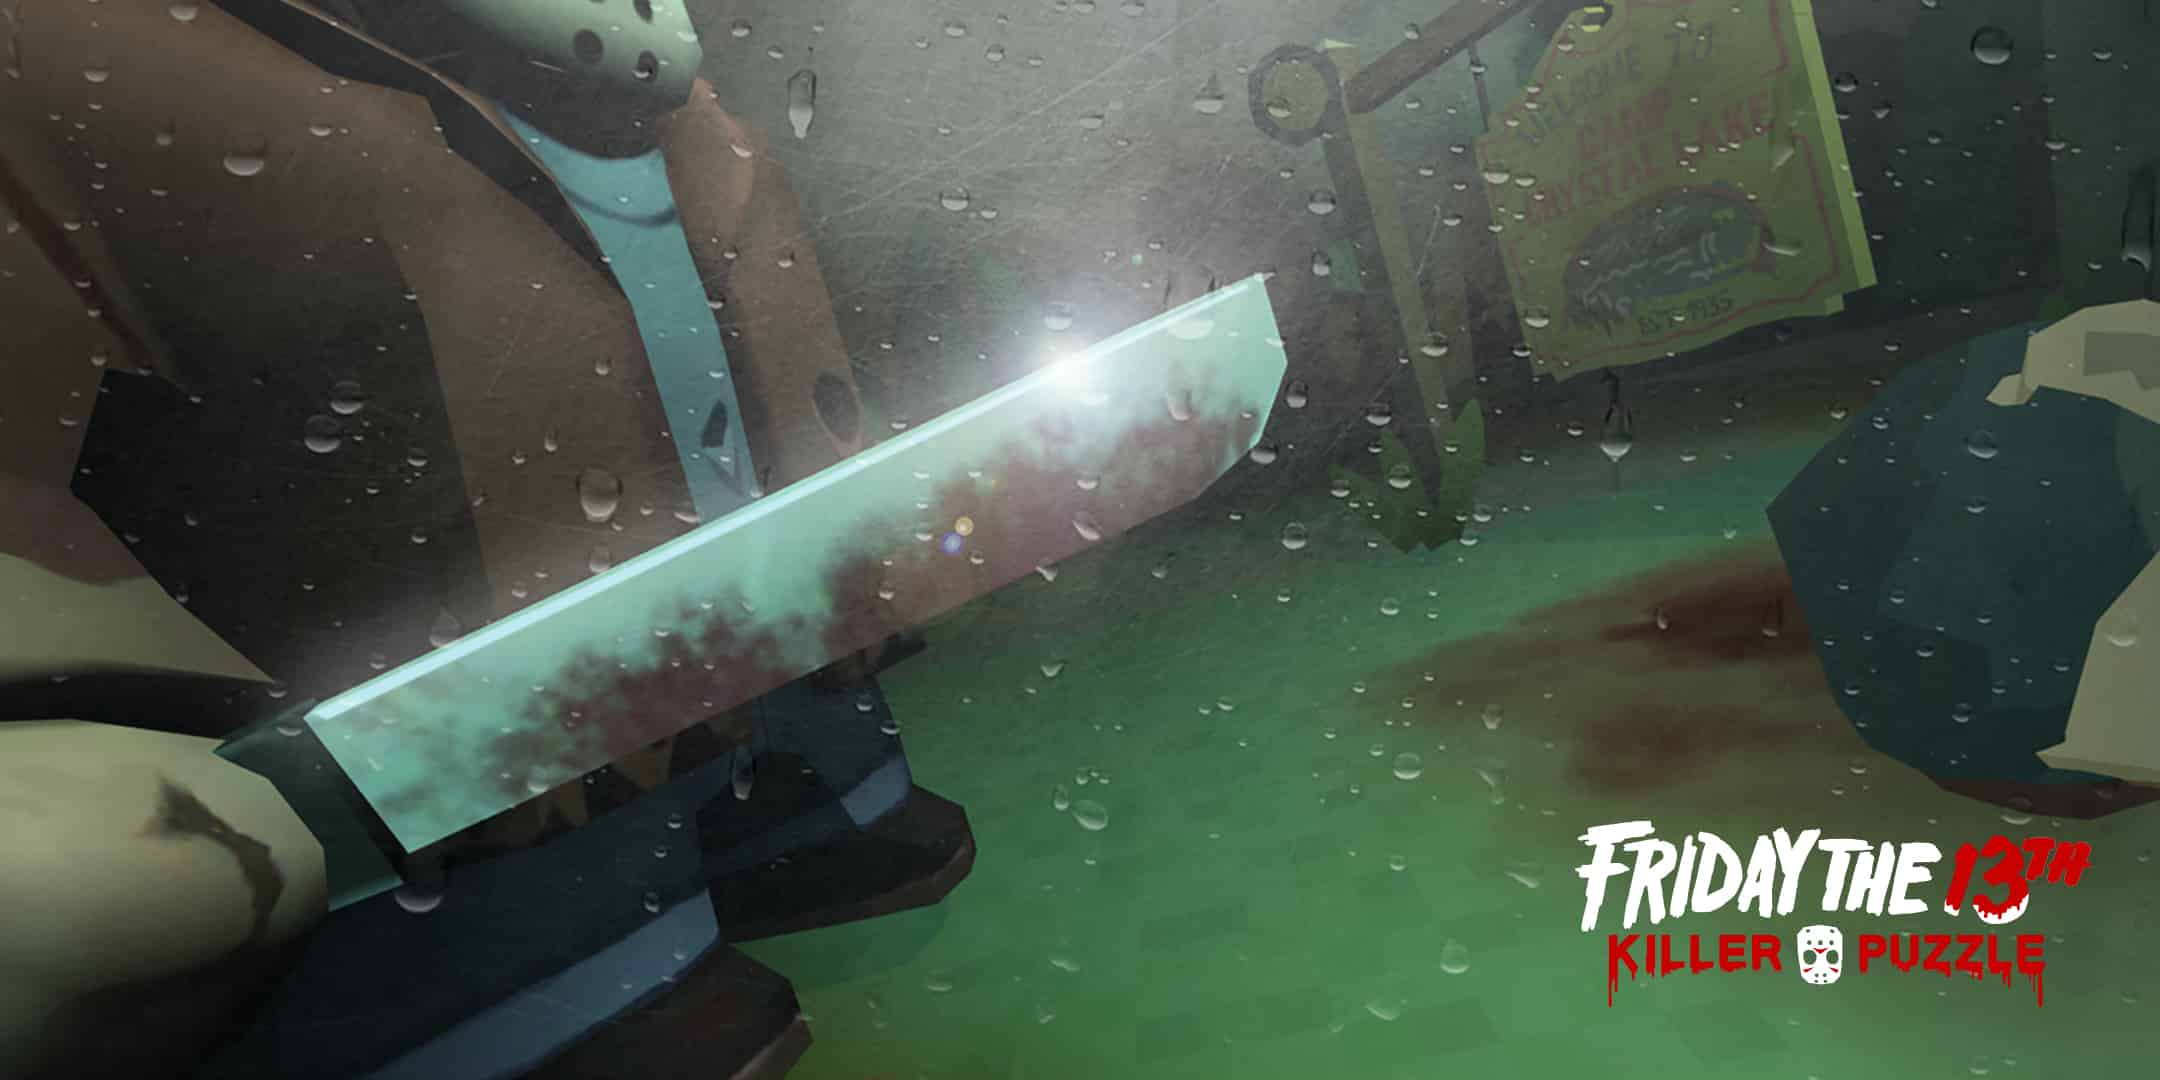 Buy Friday the 13th Killer Puzzle PS4 Compare Prices